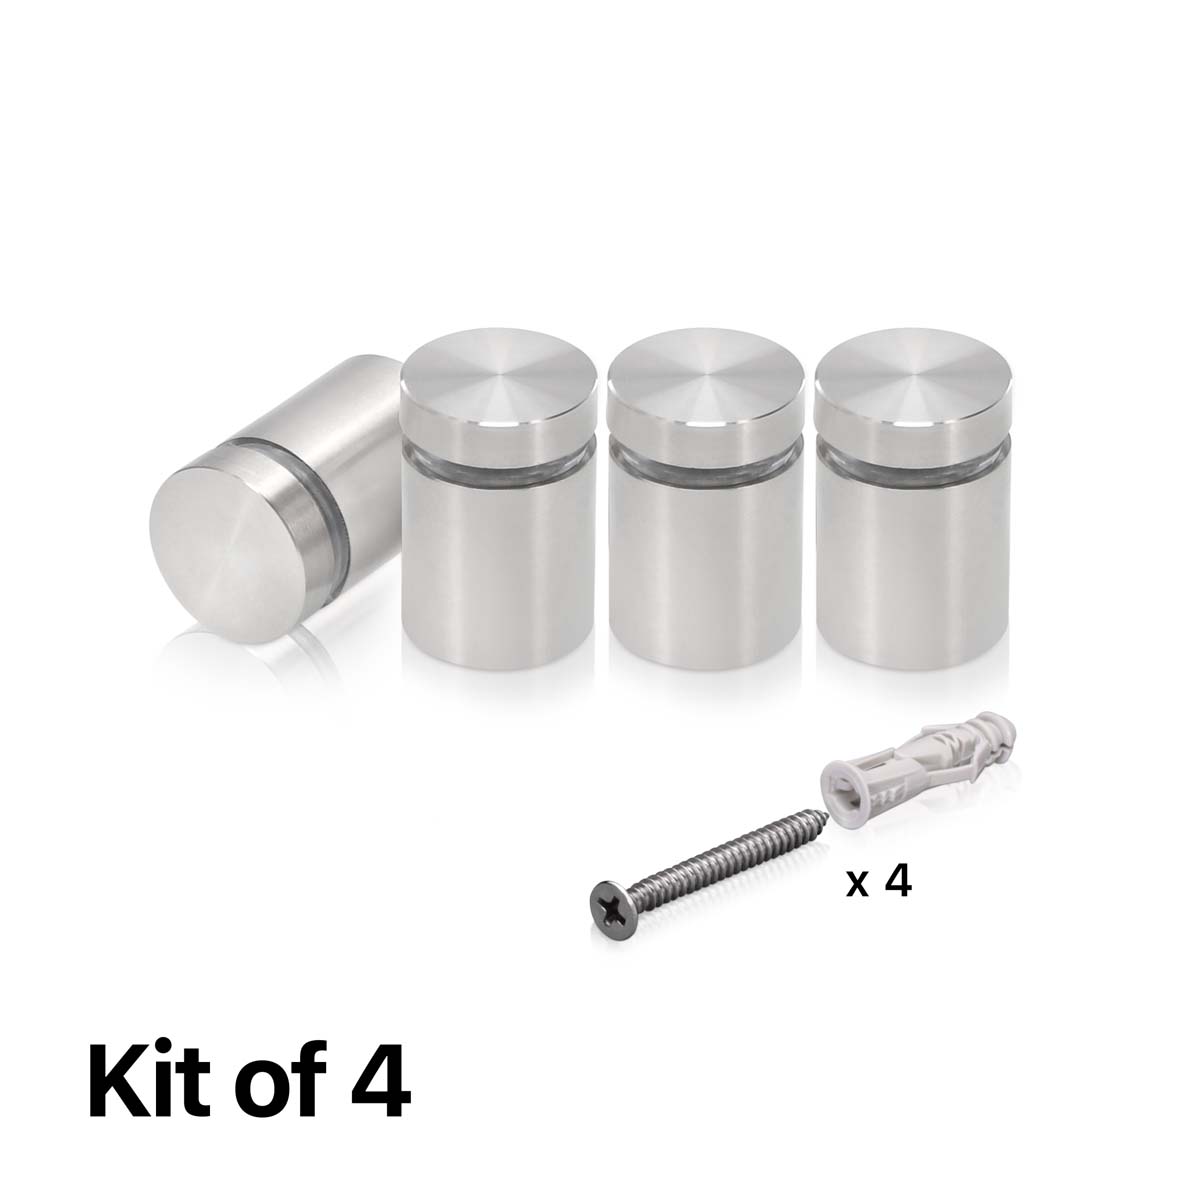 (Set of 4) 3/4'' Diameter X 3/4'' Barrel Length, Hollow Stainless Steel Brushed Finish. Easy Fasten Standoff with (4) 2216Z Screws and (4) LANC2 Anchors for concrete or drywall (For Inside Use Only) [Required Material Hole Size: 7/16'']